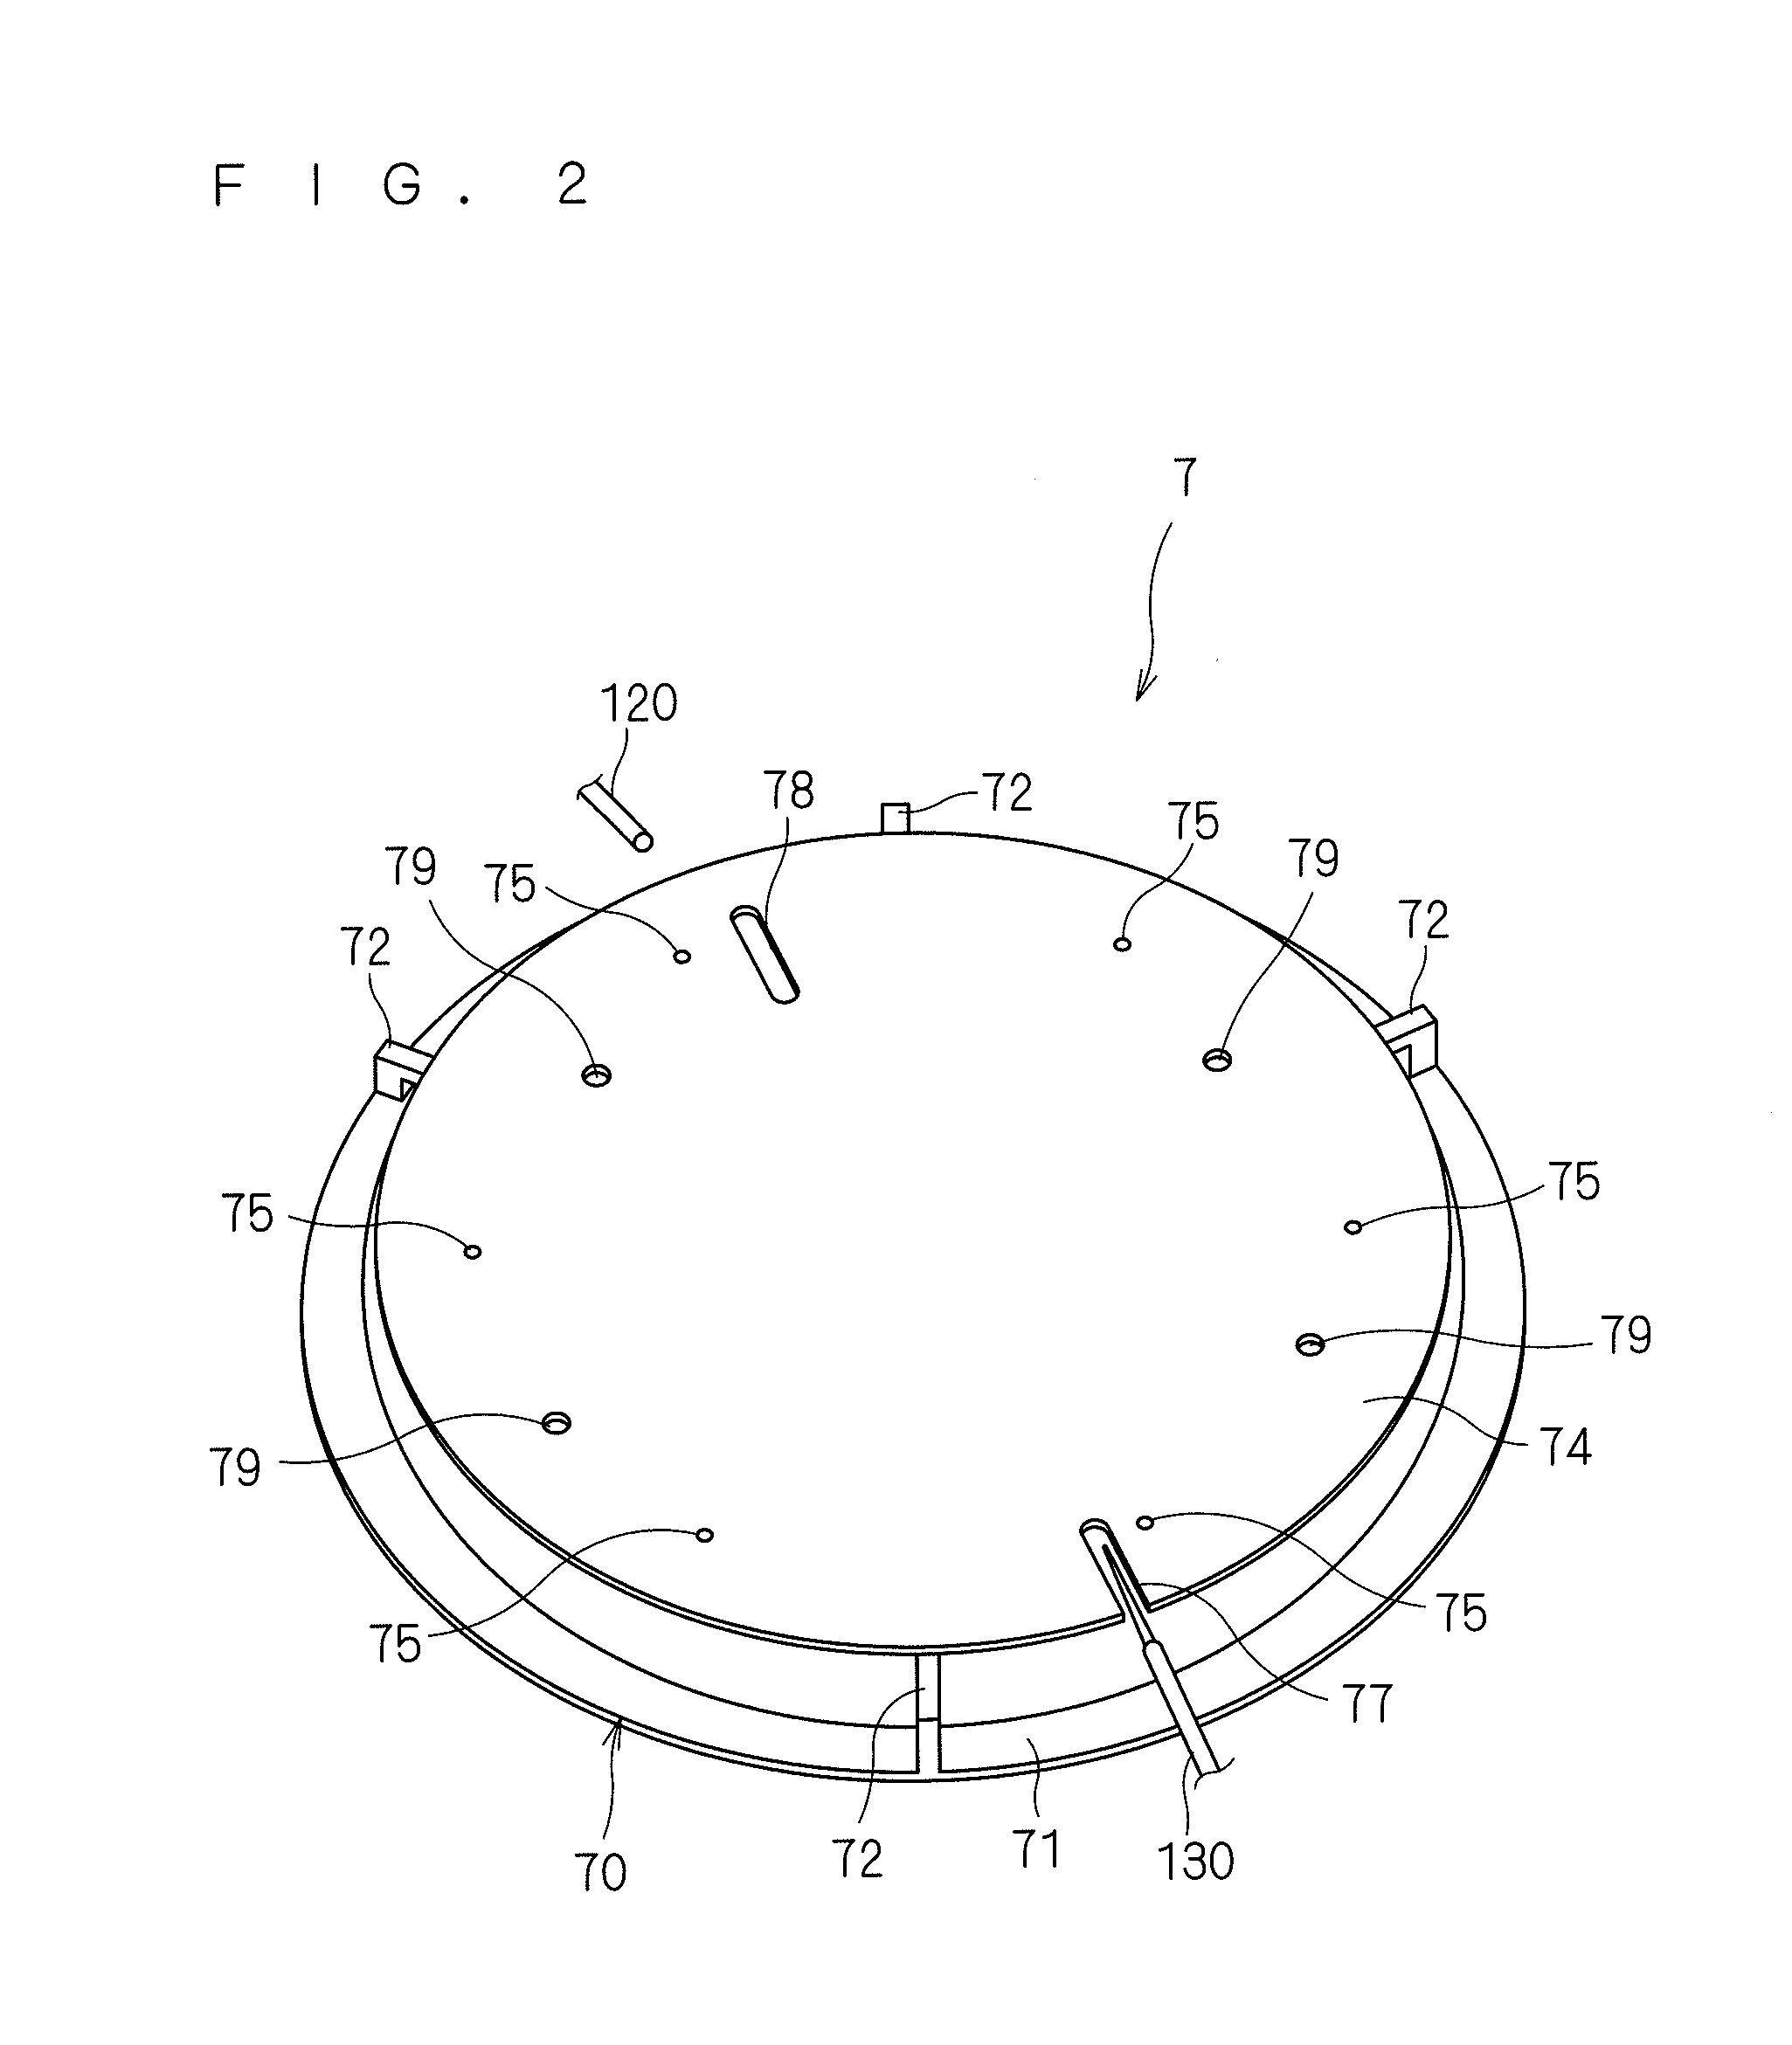 Heat treatment apparatus for heating substrate by irradiating substrate with flashes of light